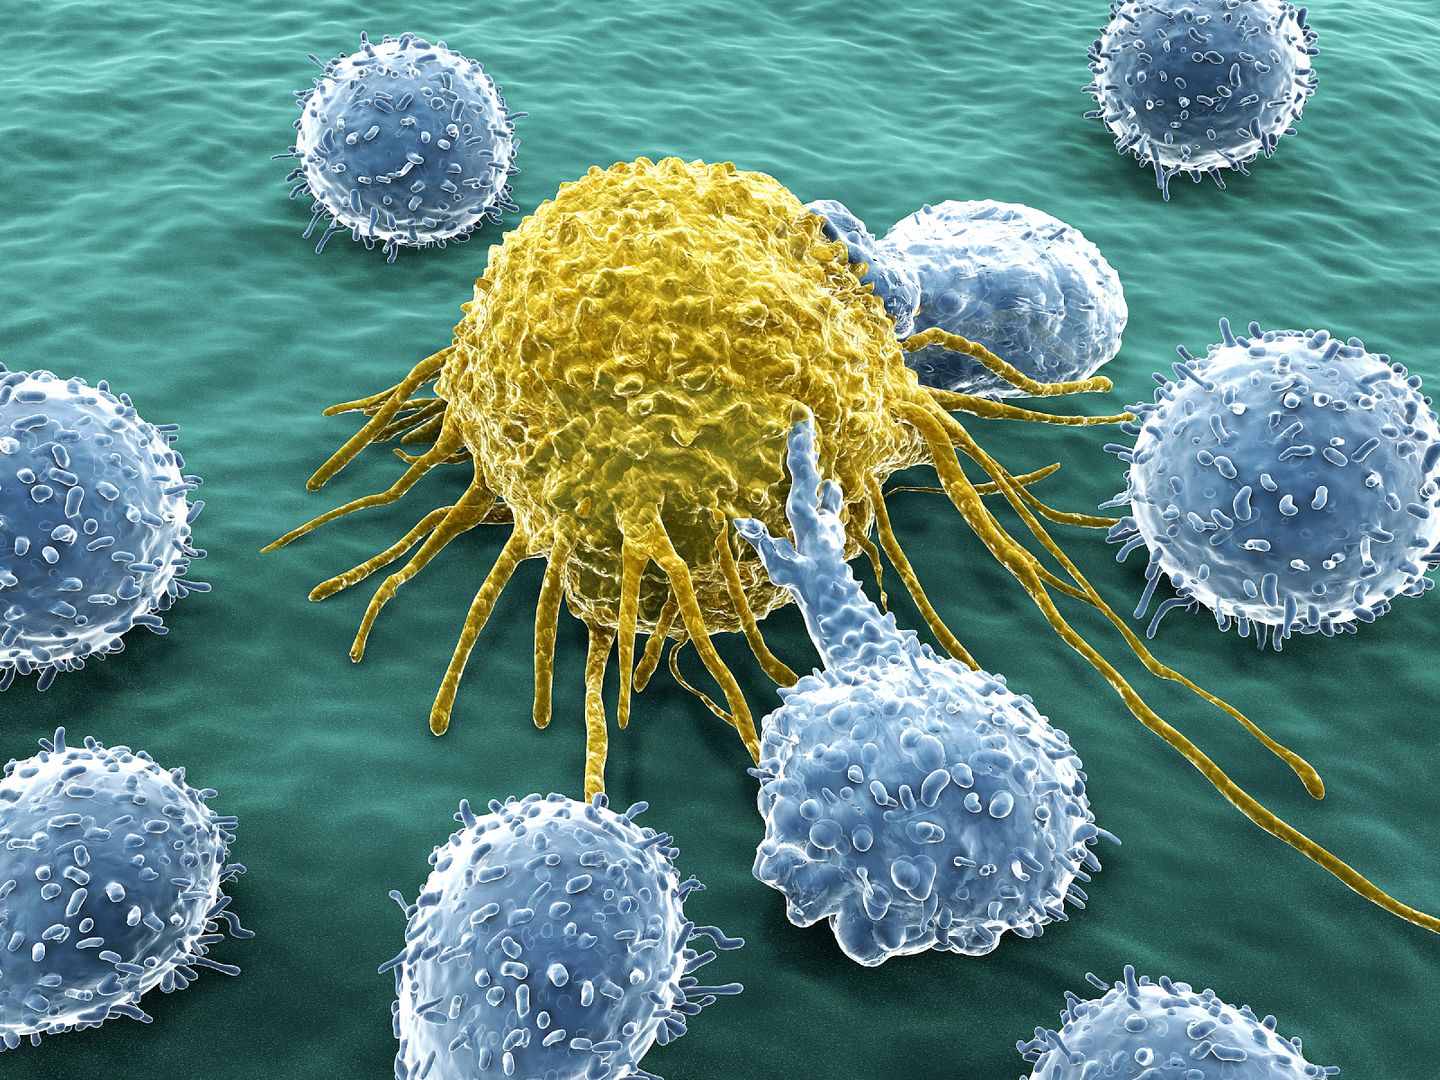 Immune cells attacking cancer cell photo Cancer cell attacked by immune cells_zpskabbpq2m.jpg